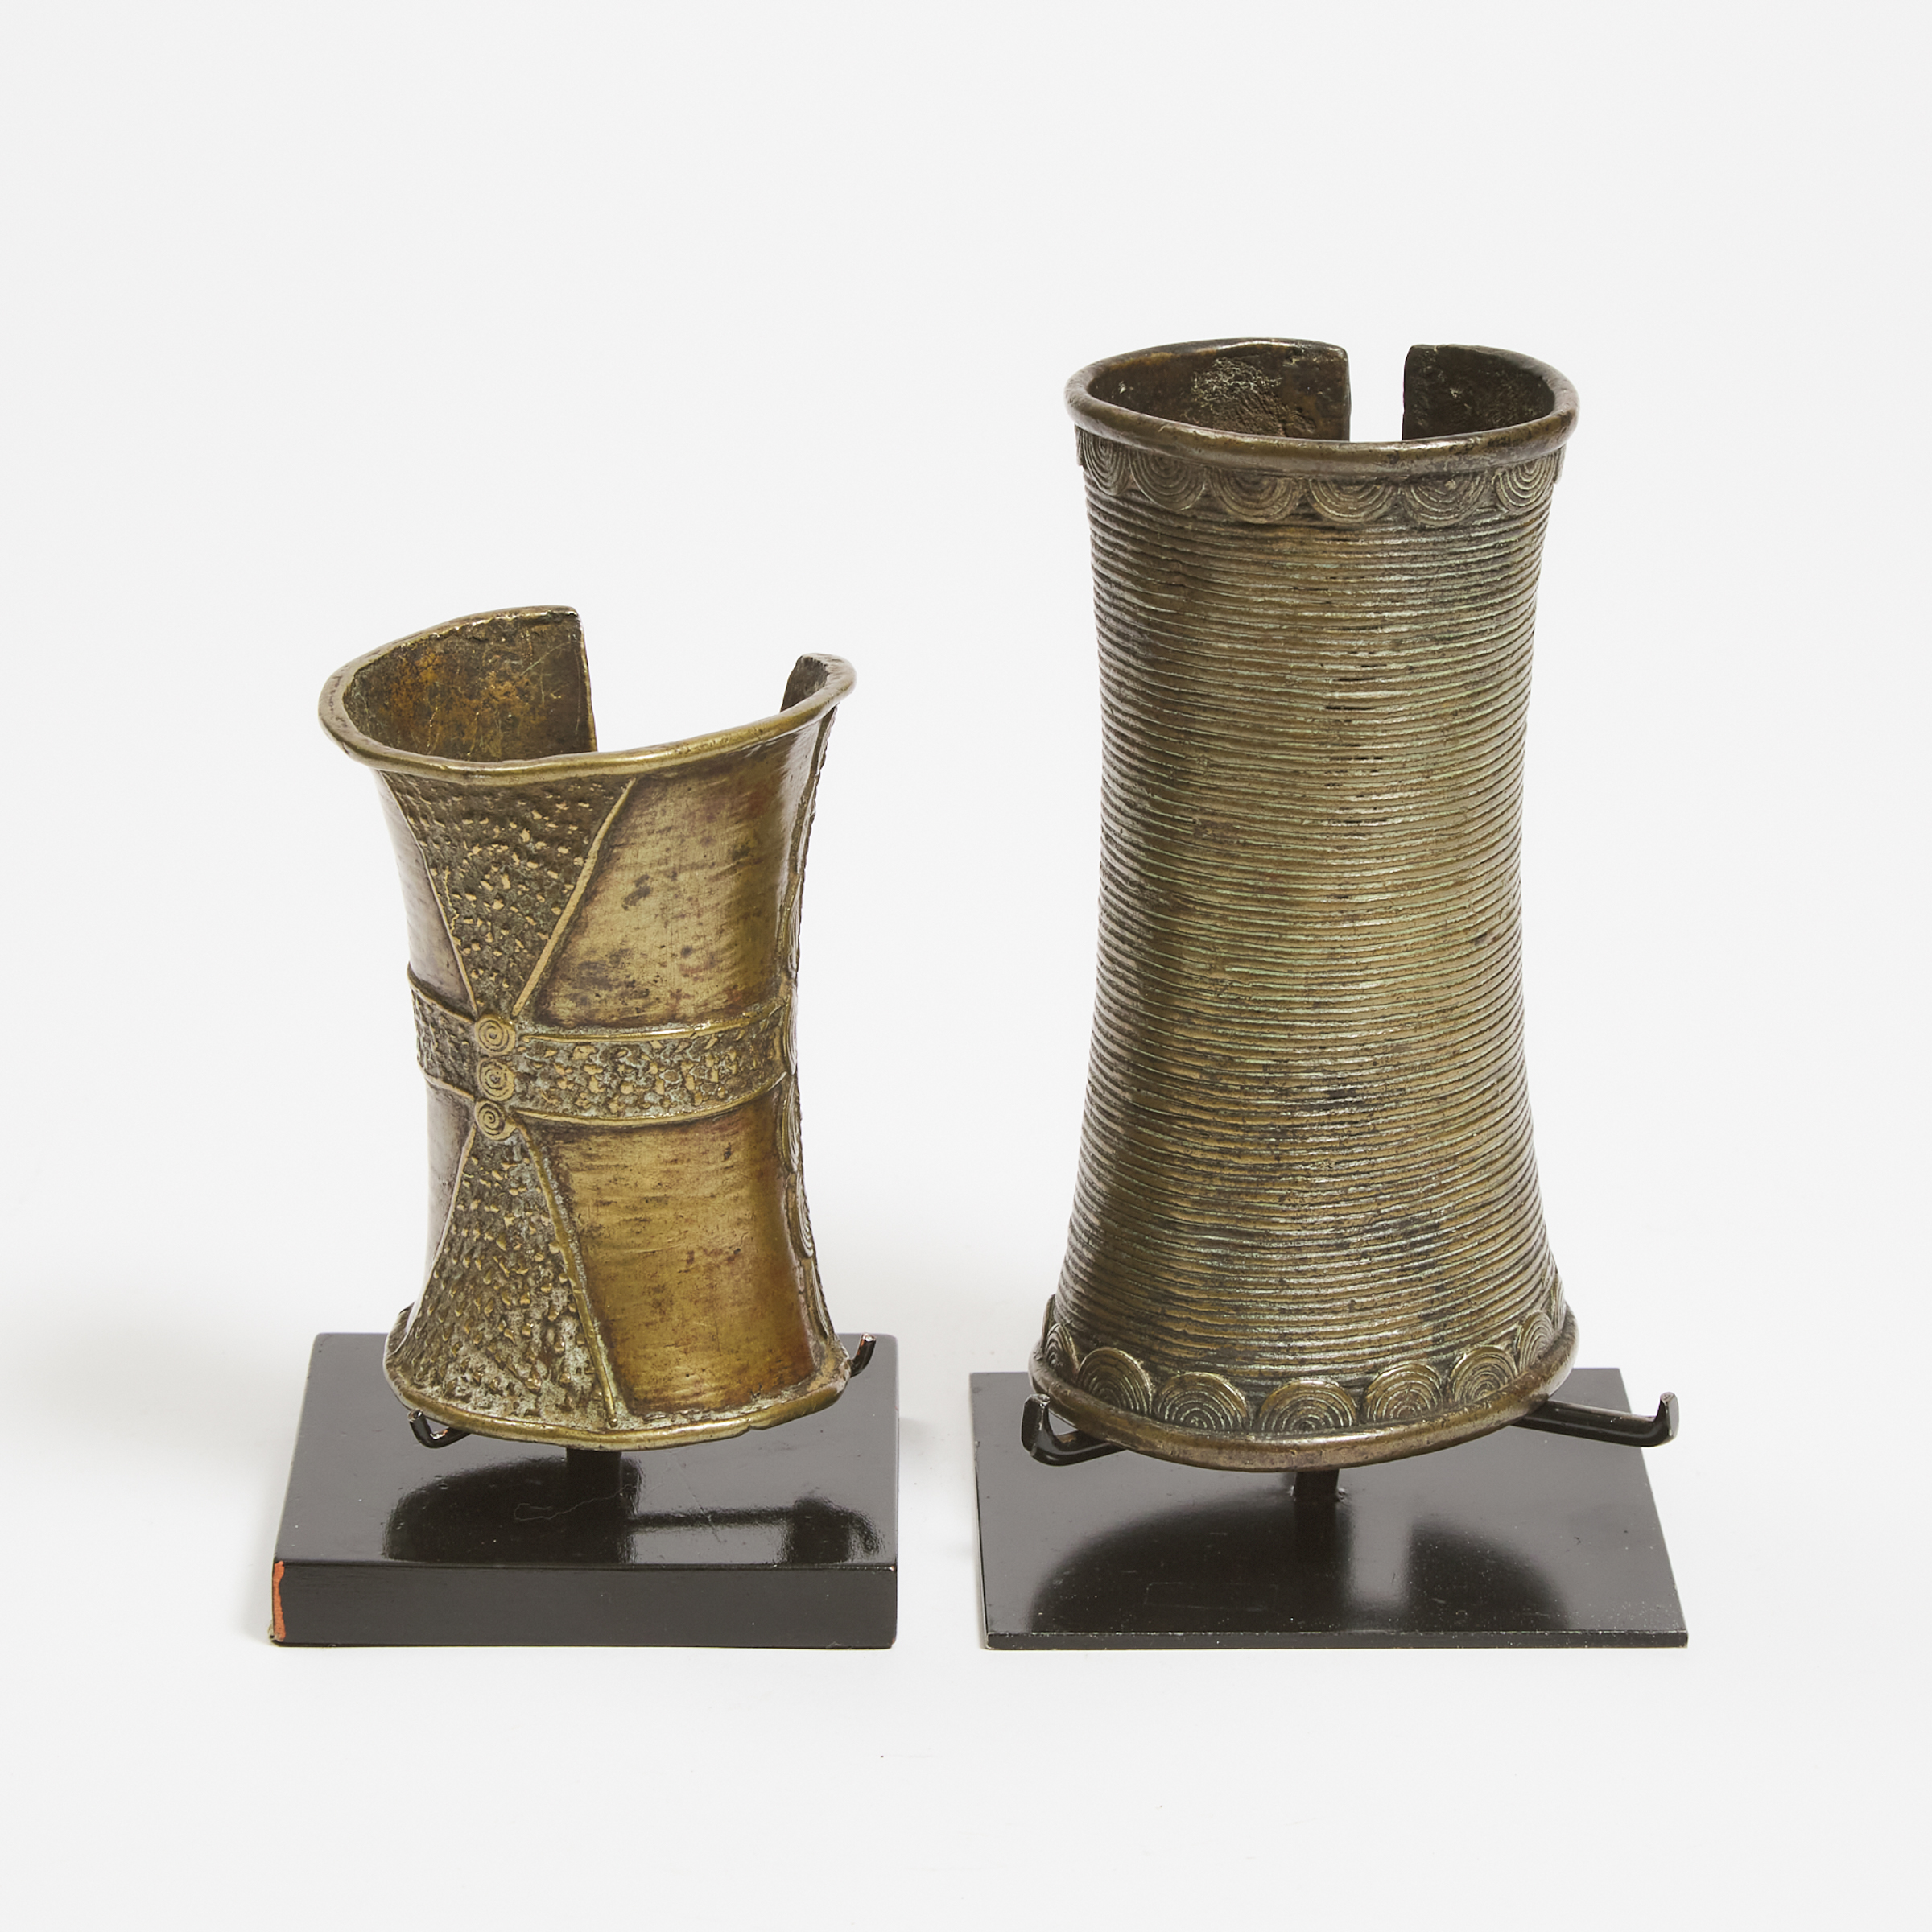 Two West African Bronze Ankle/Wrist Cuffs, possibly Gurunsi, Ghana/Burkina Faso, late 19th to early 20th century